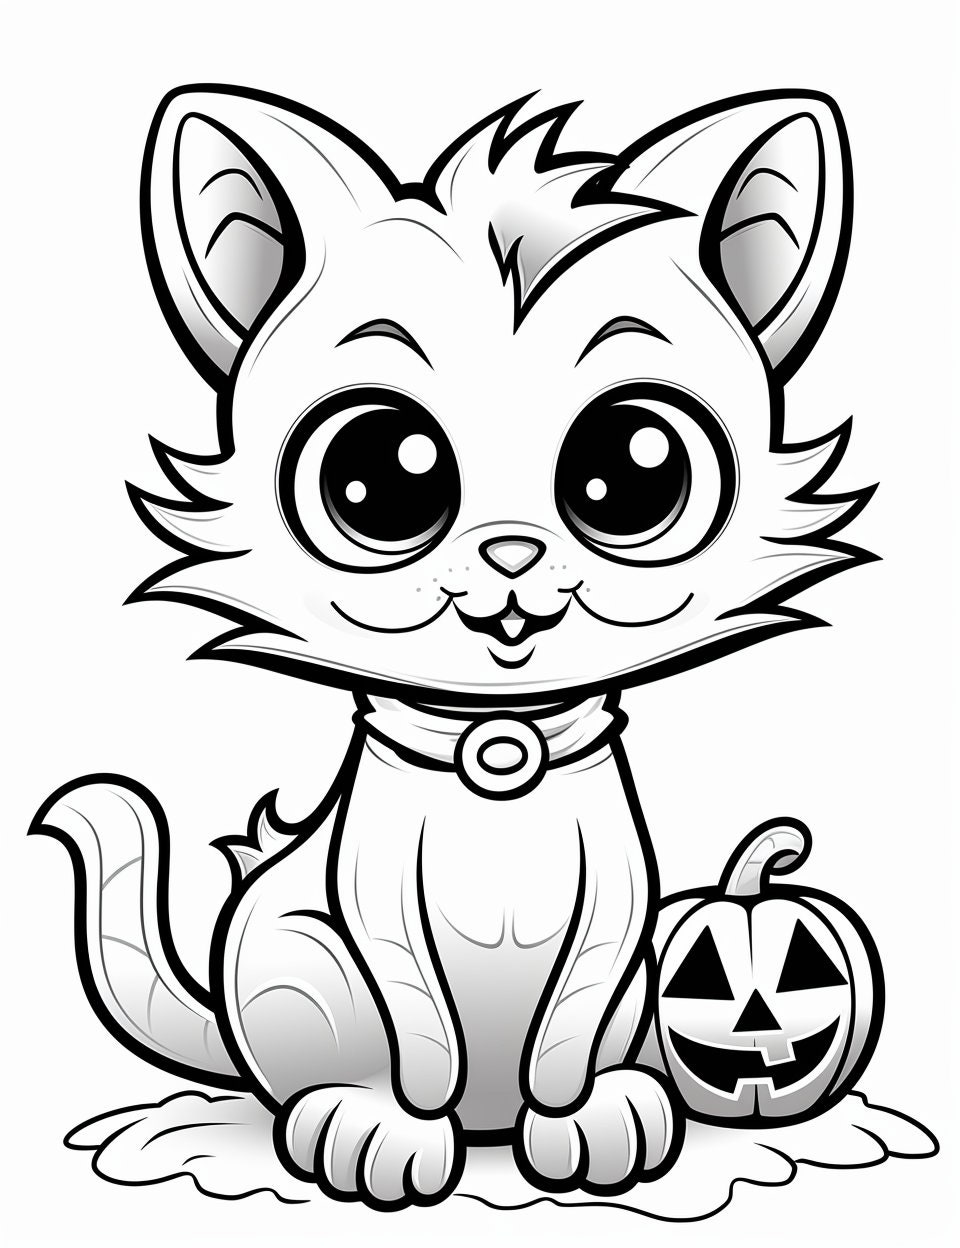 Halloween Coloring Pages for Kids 4-8 50 Printable Pages - Etsy